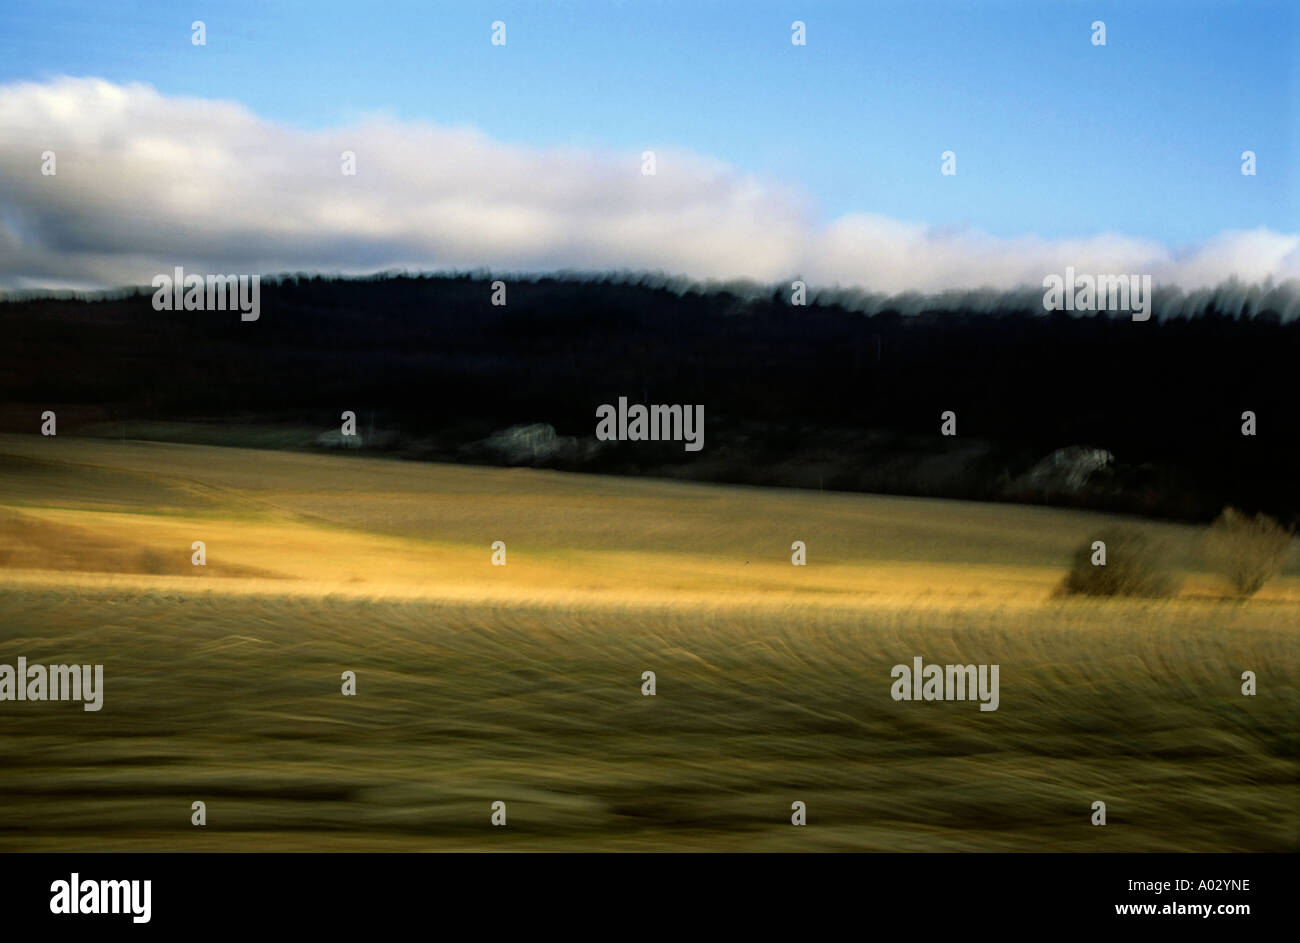 Blurred view from a car of a wheat field Stock Photo